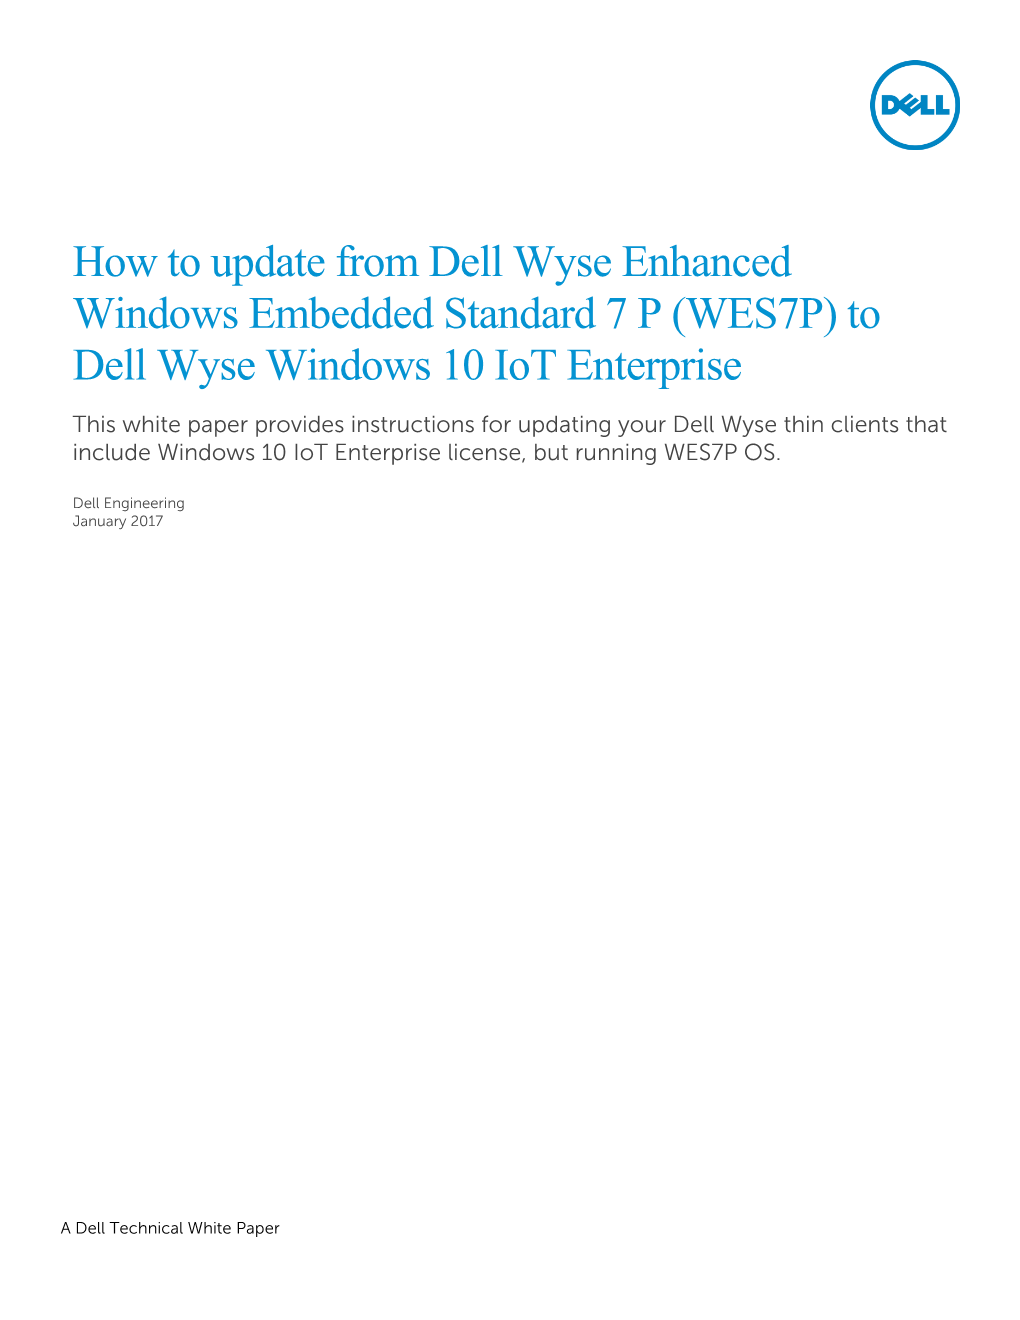 (WES7P) to Dell Wyse Windows 10 Iot Enterprise